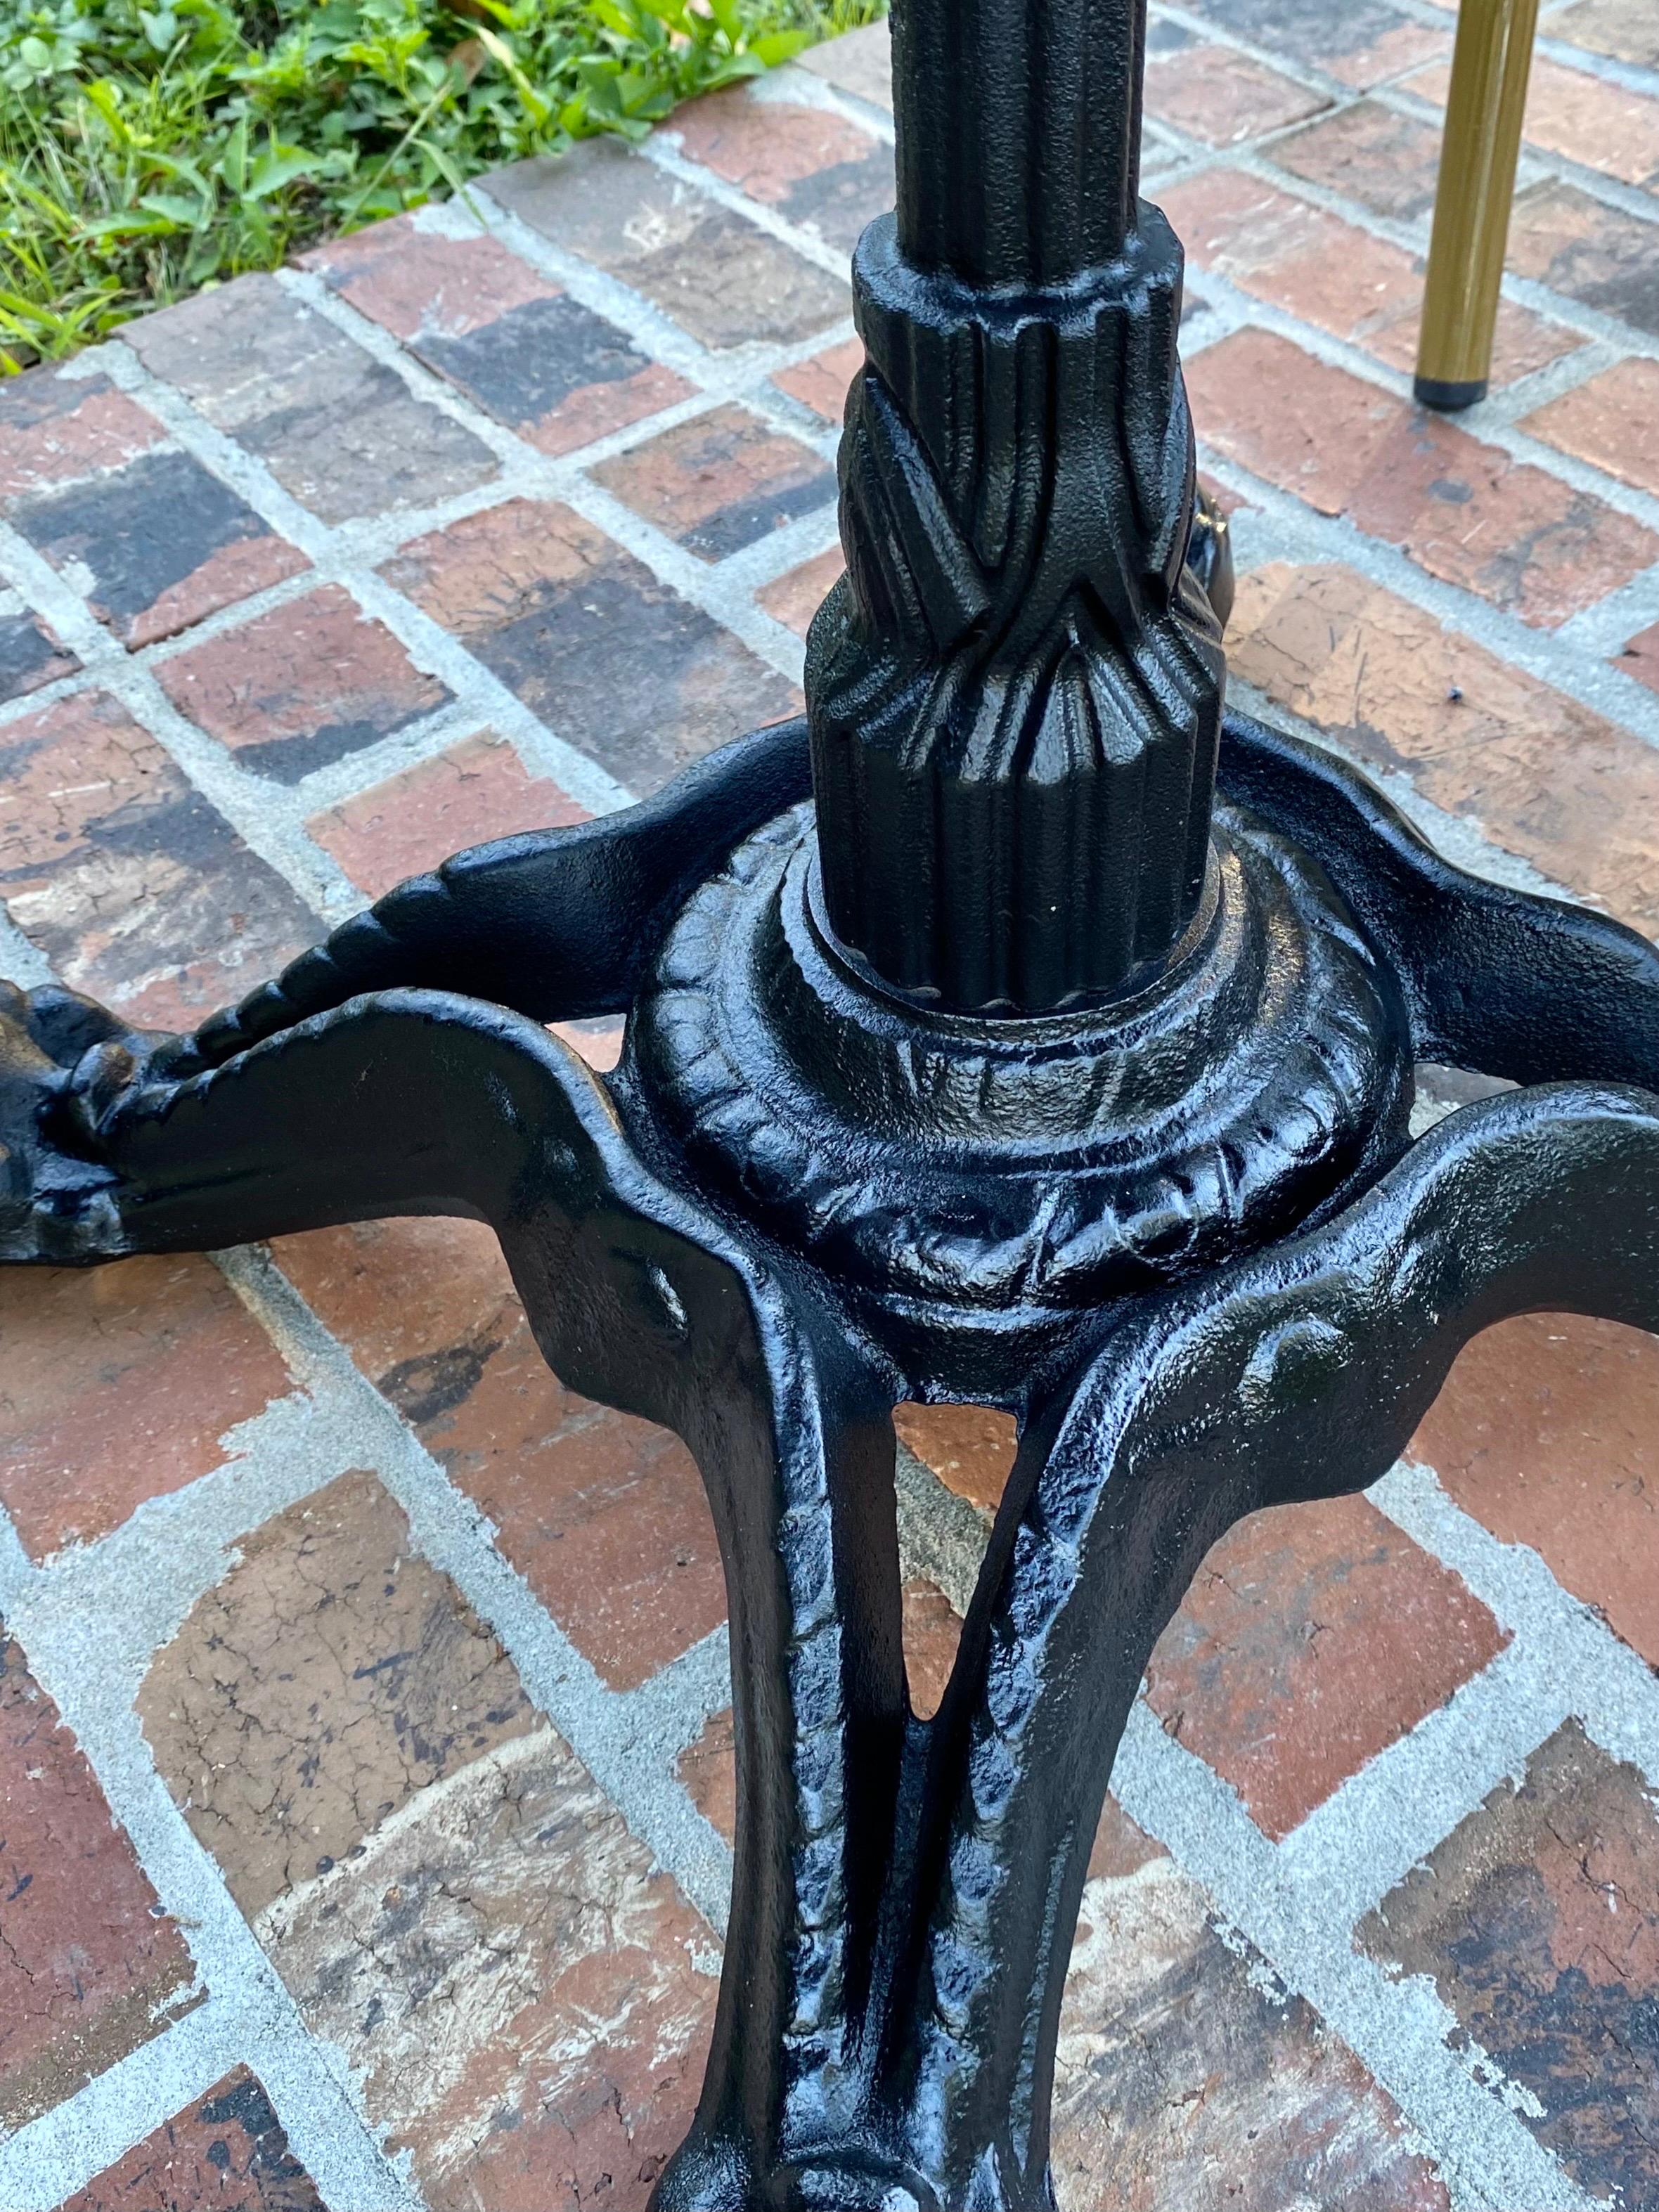 Vintage French Iron & Marble Bistro Table 1